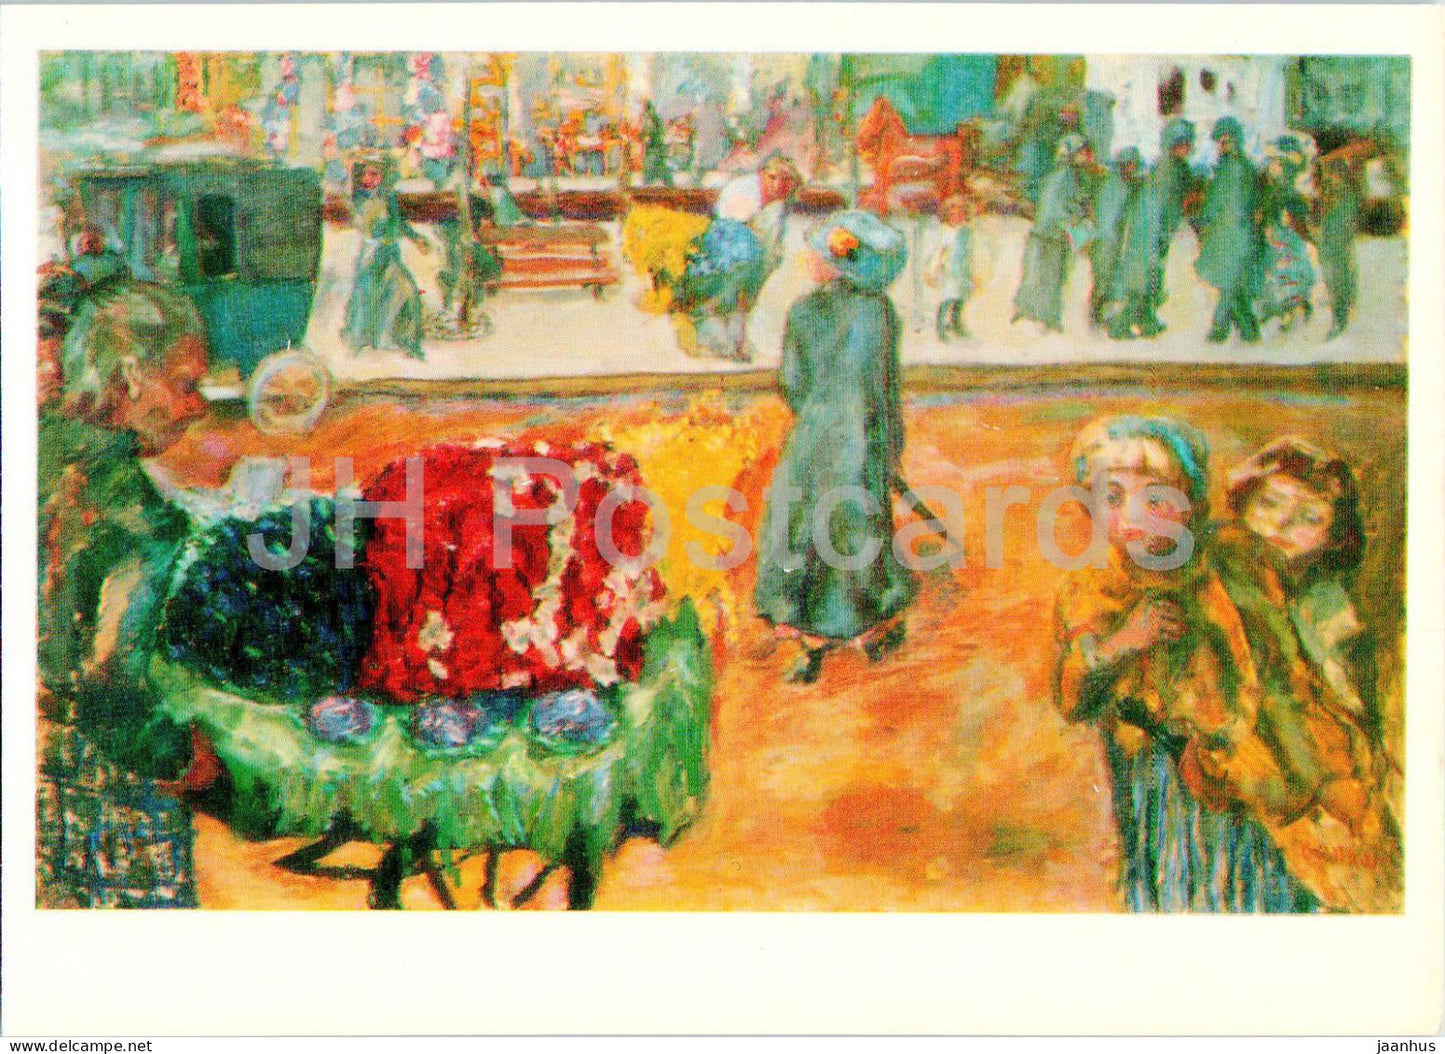 painting by Pierre Bonnard - Evening in Paris - French art - 1977 - Russia USSR - unused - JH Postcards